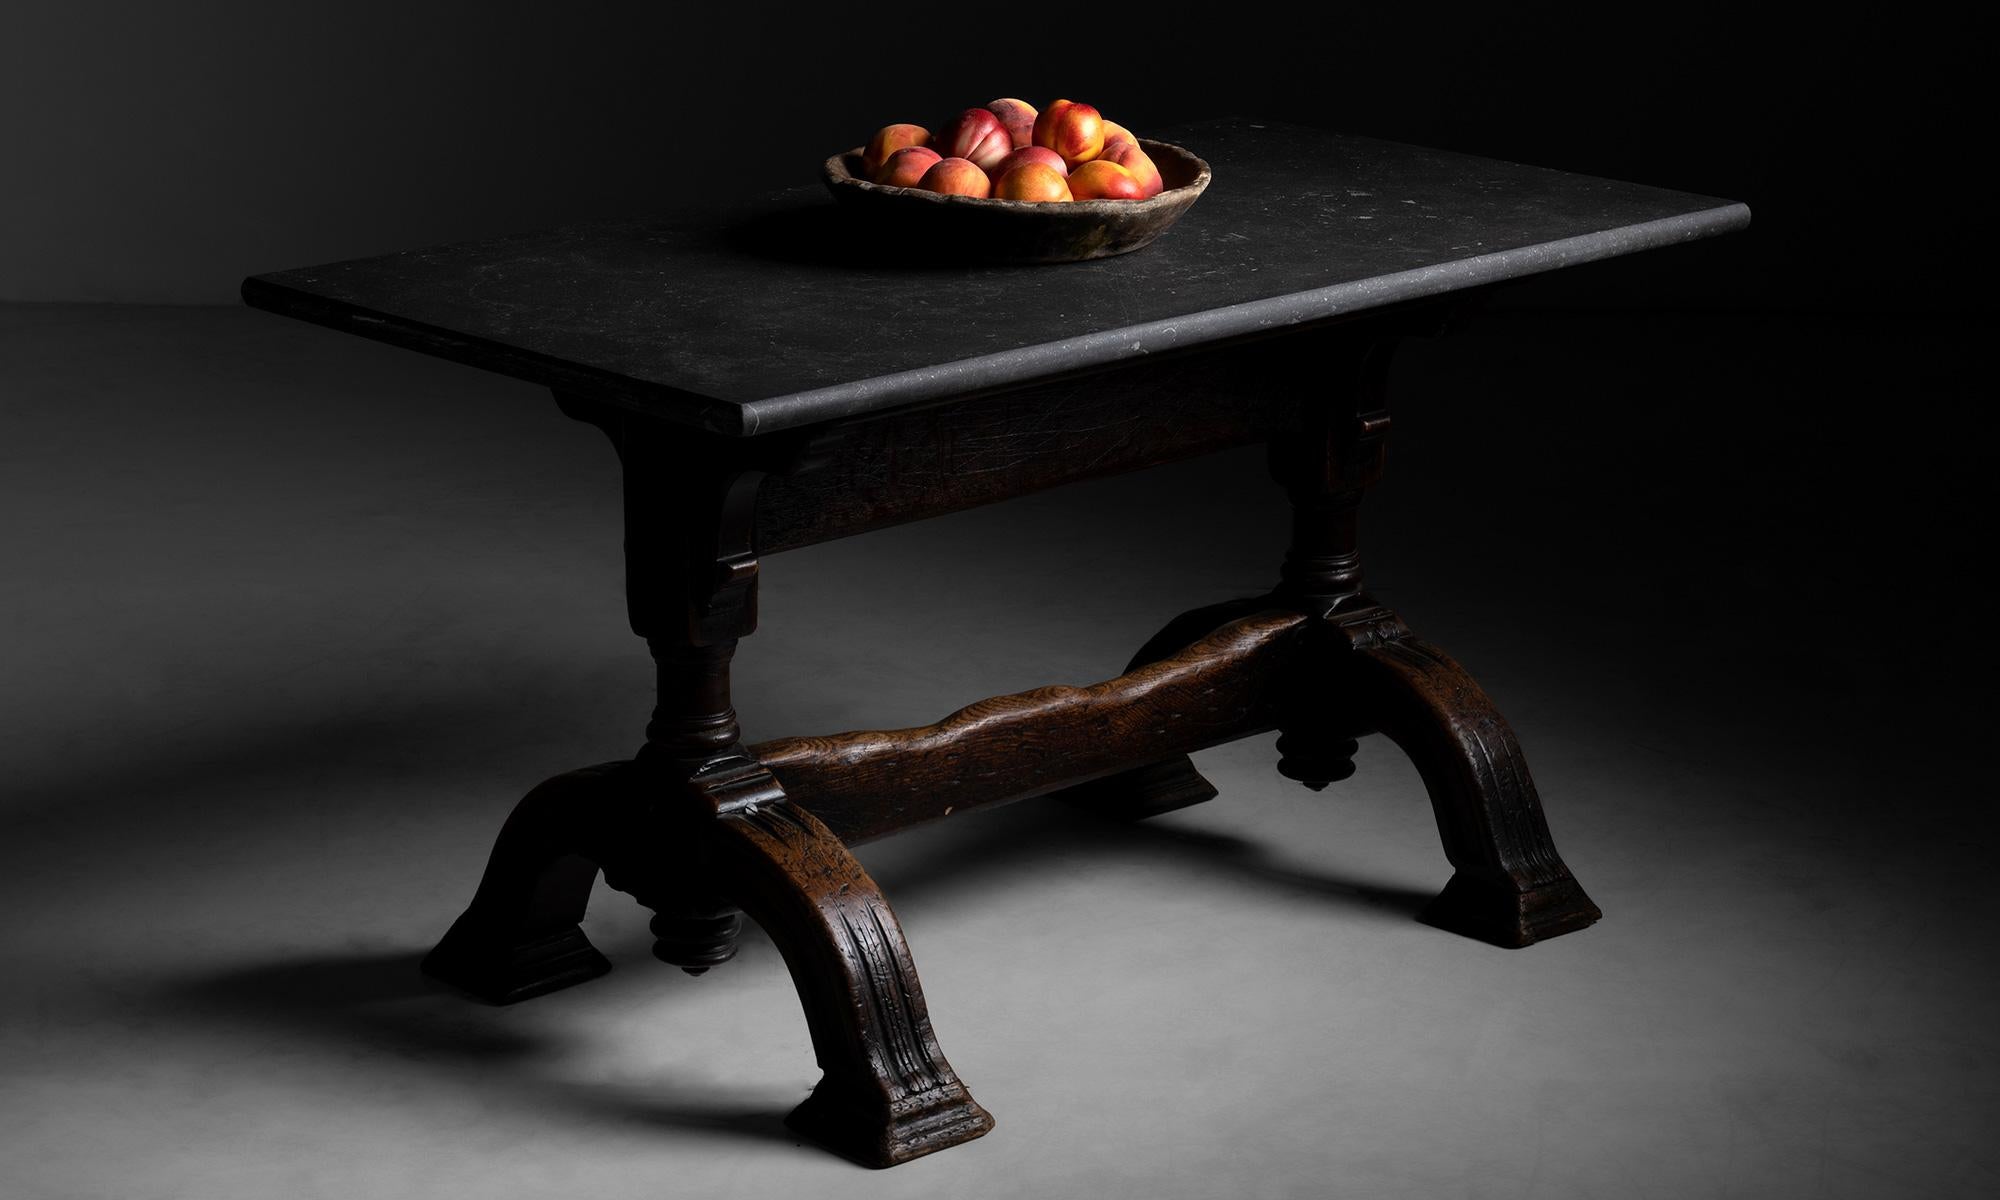 French Stone & Carved Wood Side Table, France circa 1870